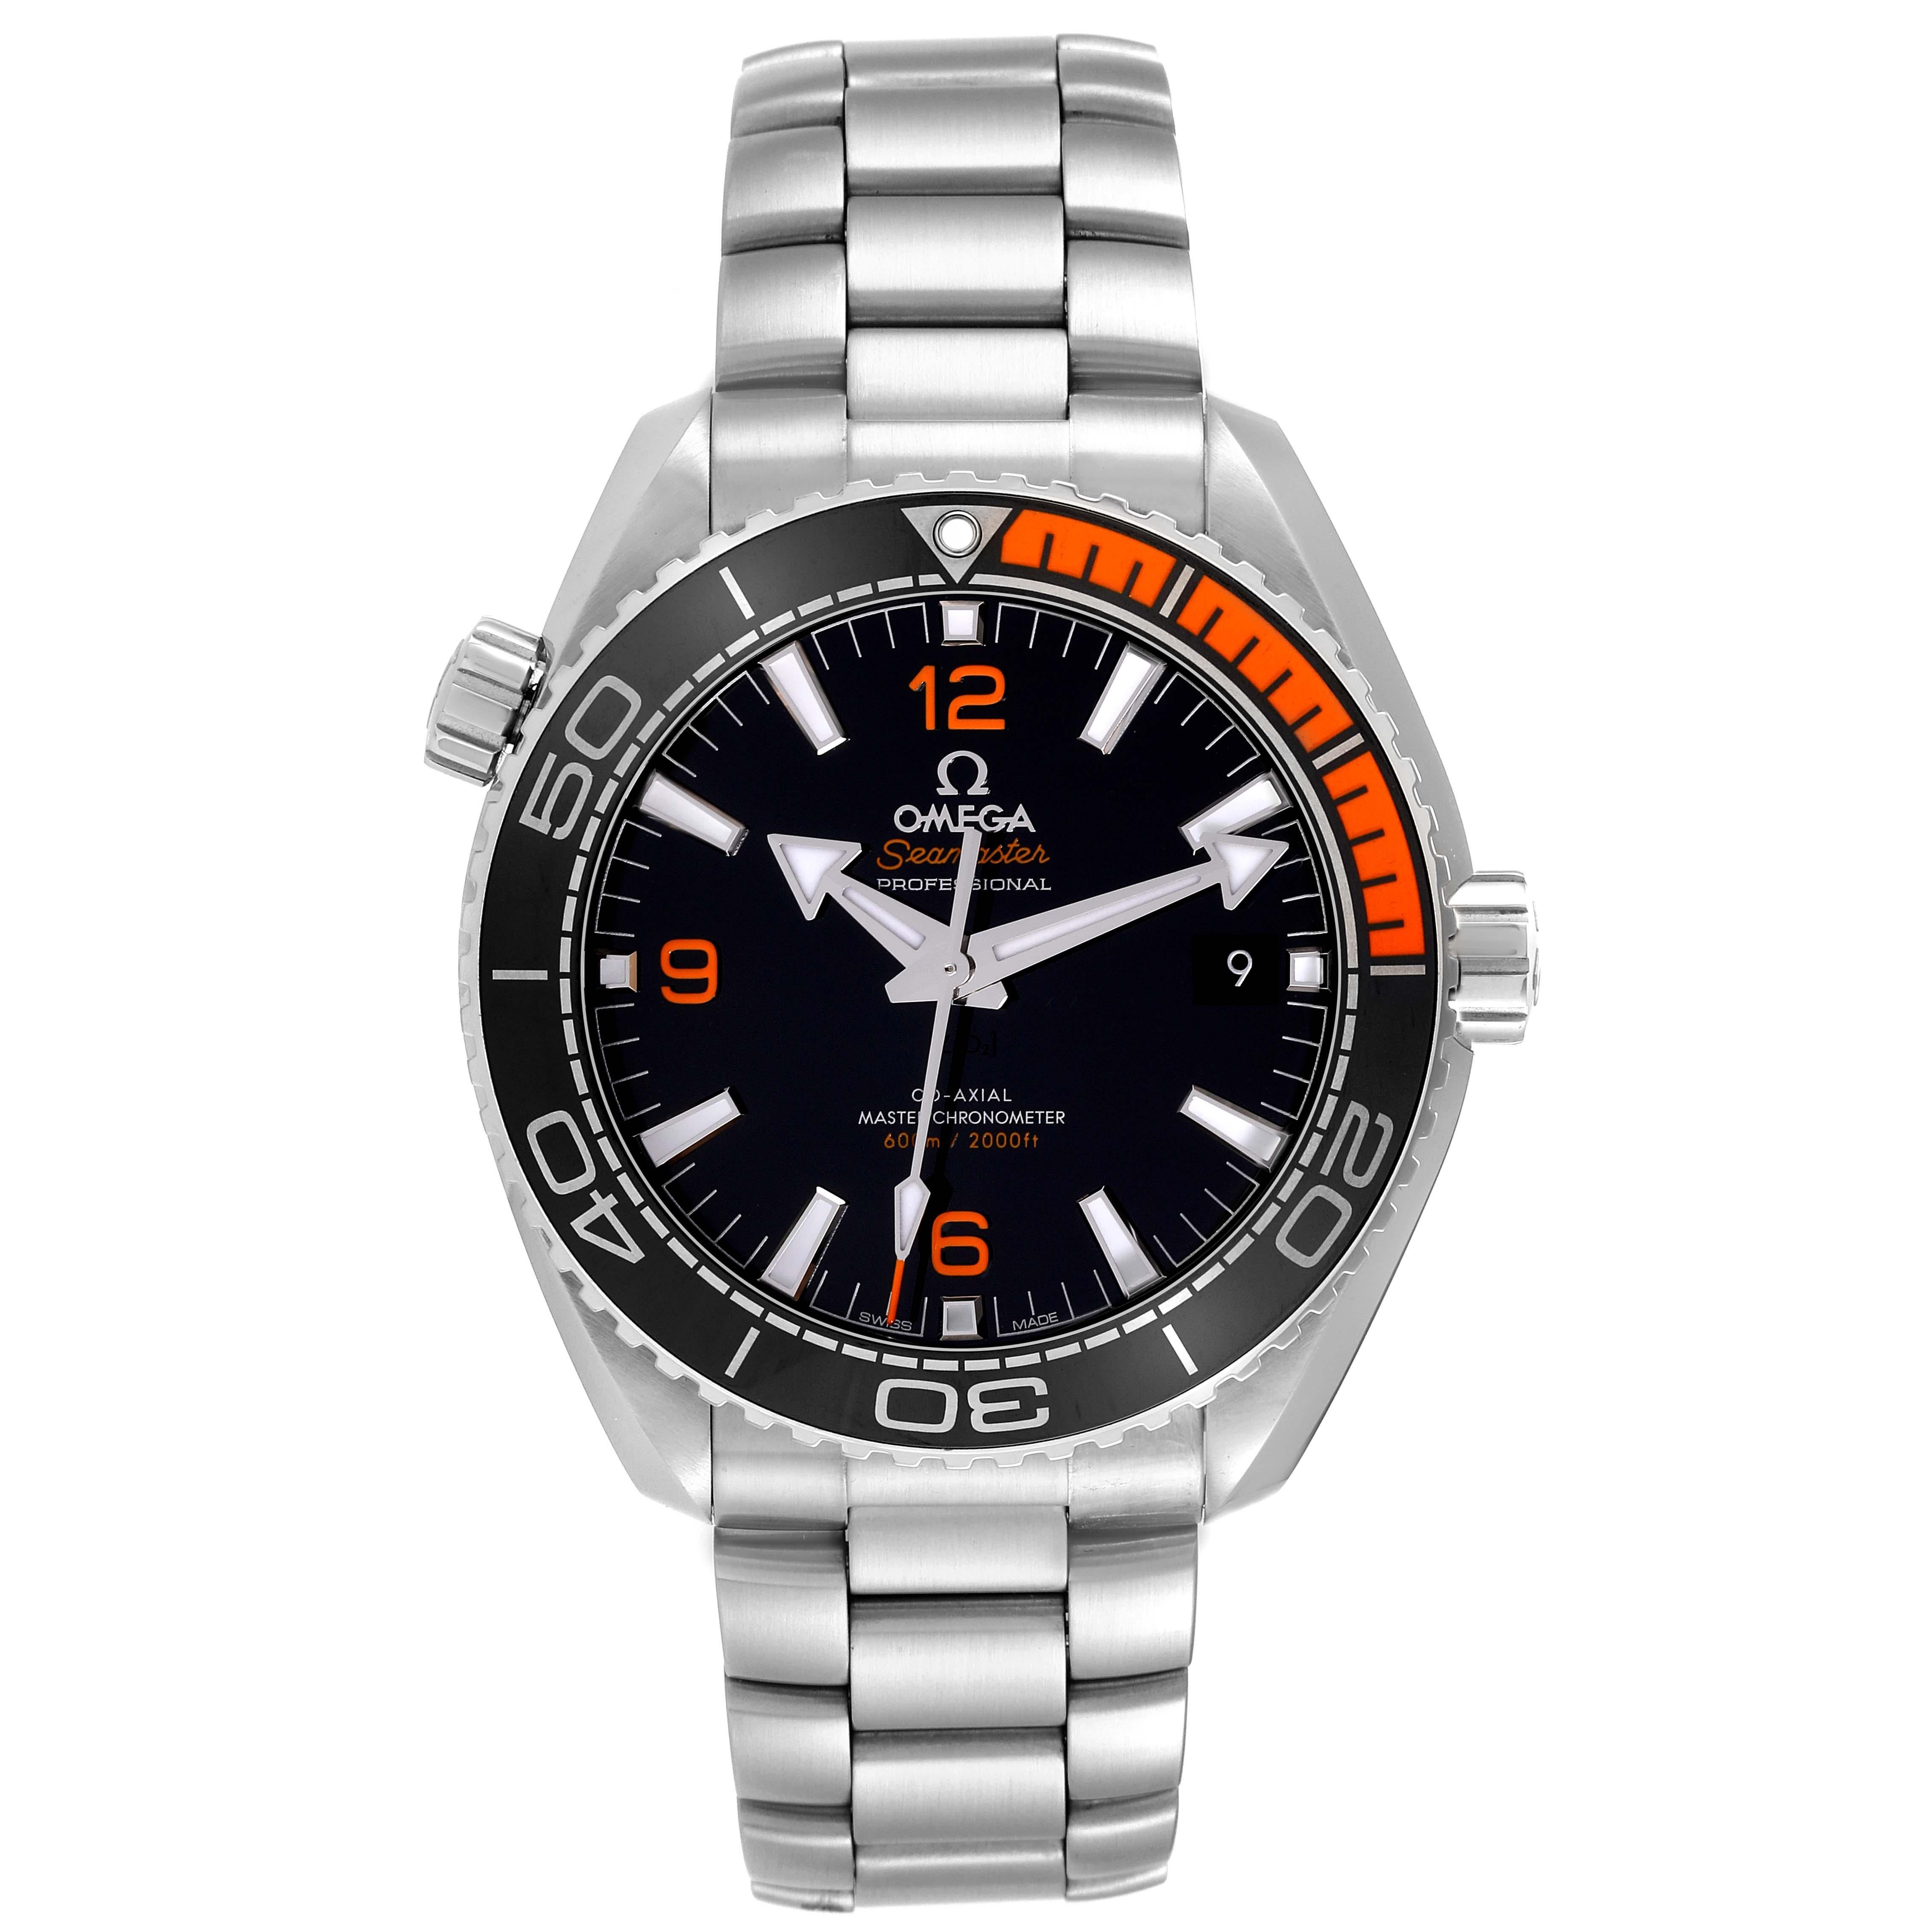 Omega Planet Ocean Black Orange Bezel Steel Mens Watch 215.30.44.21.01.002 Box Card. Self-winding movement with Co-Axial escapement. Certified Master Chronometer, approved by METAS, resistant to magnetic fields reaching 15,000 gauss. Free